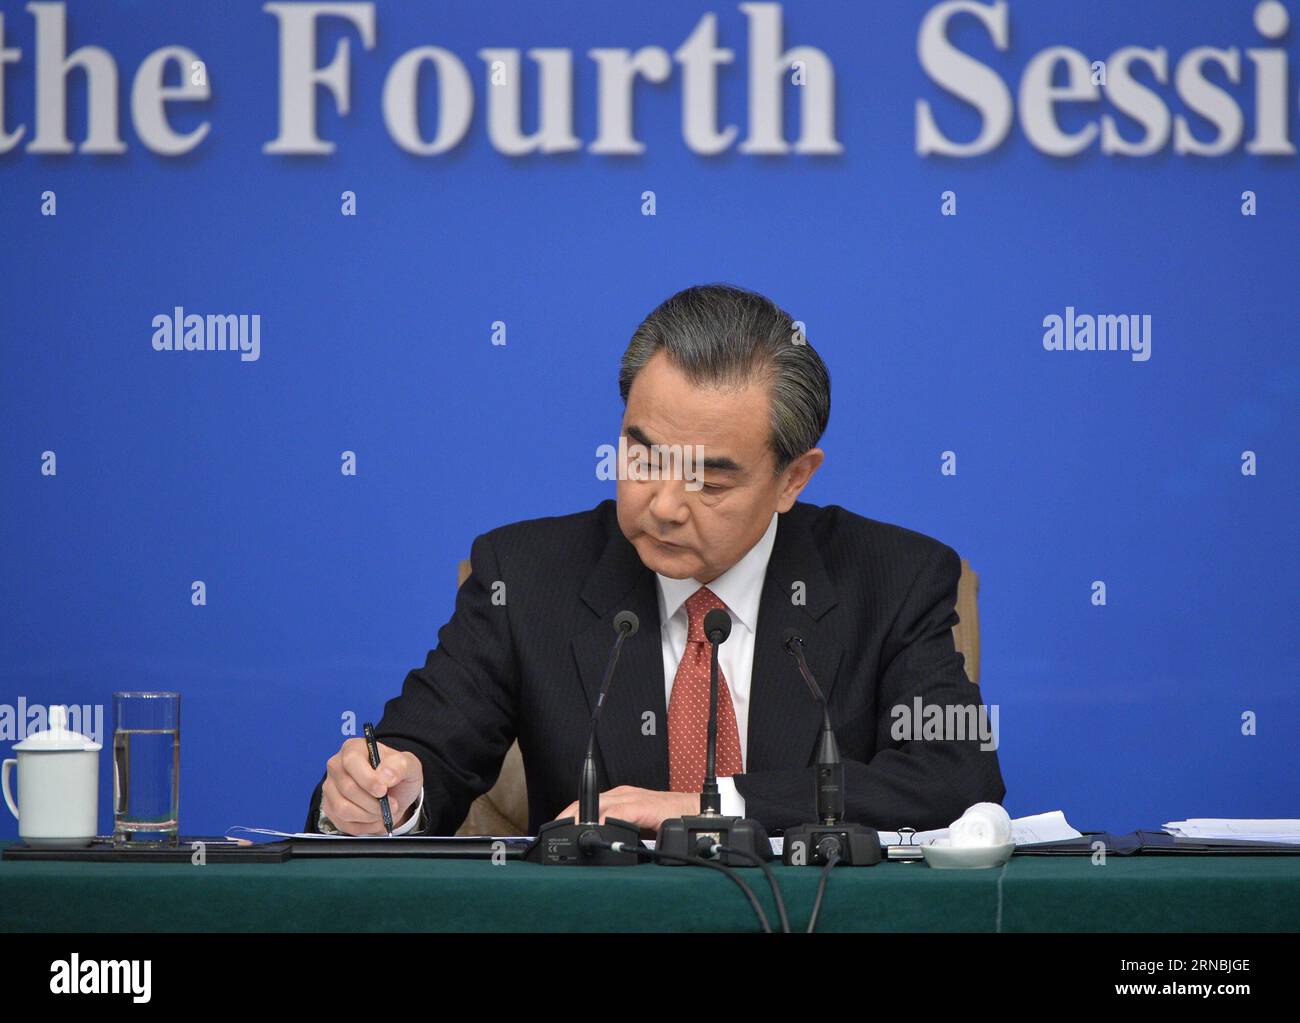 (160308) -- BEIJING, March 8, 2016 -- Chinese Foreign Minister Wang Yi jots down questions from journalists during a press conference on China s foreign policy and foreign relations on the sidelines of the fourth session of China s 12th National People s Congress in Beijing, capital of China, March 8, 2016. )(mcg) (TWO SESSIONS)CHINA-BEIJING-NPC-PRESS CONFERENCE-WANG YI (CN) LixXin PUBLICATIONxNOTxINxCHN   Beijing March 8 2016 Chinese Foreign Ministers Wang Yi jots Down Questions from Journalists during a Press Conference ON China S Foreign Policy and Foreign relations ON The Sideline of The F Stock Photo